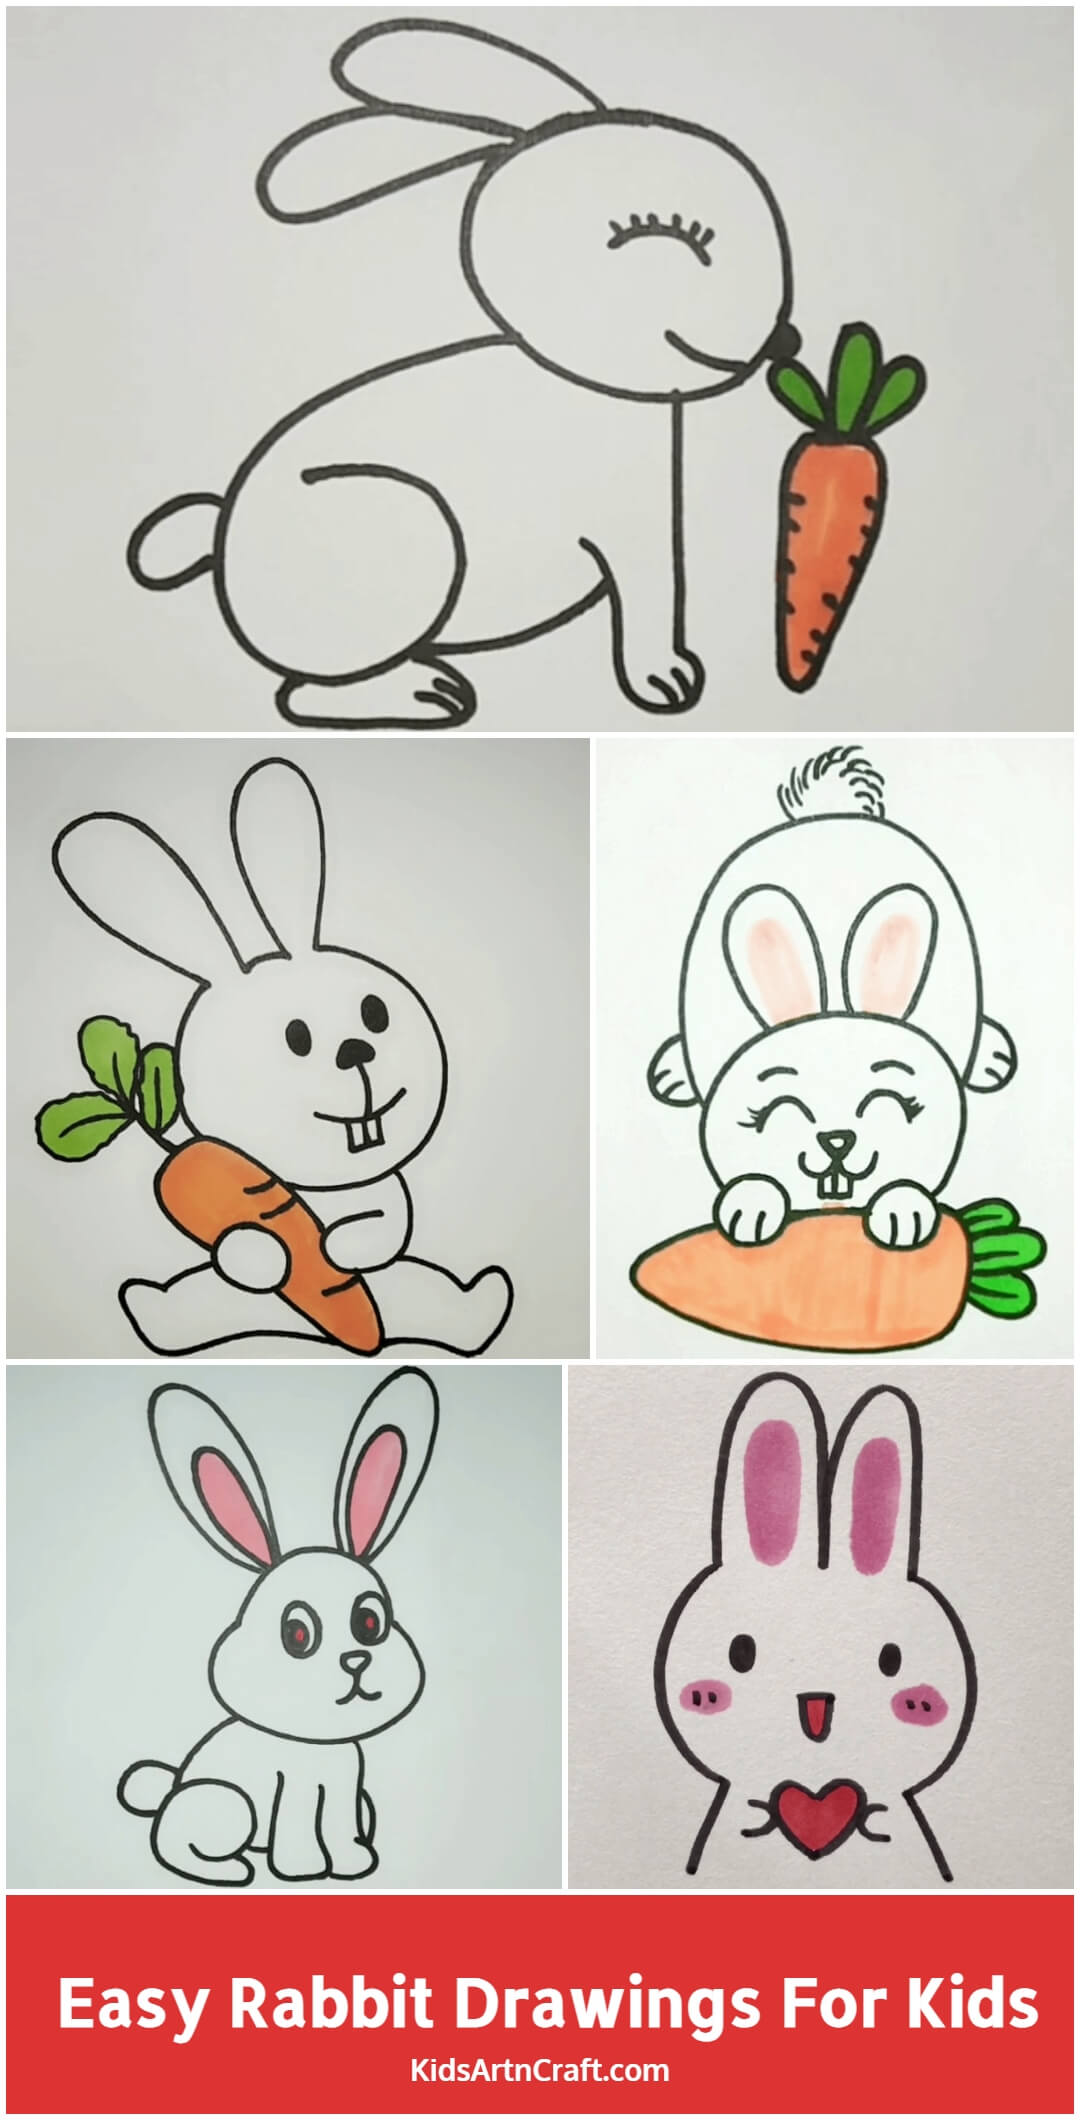 Easy How to Draw a Rabbit Tutorial and Rabbit Coloring Page